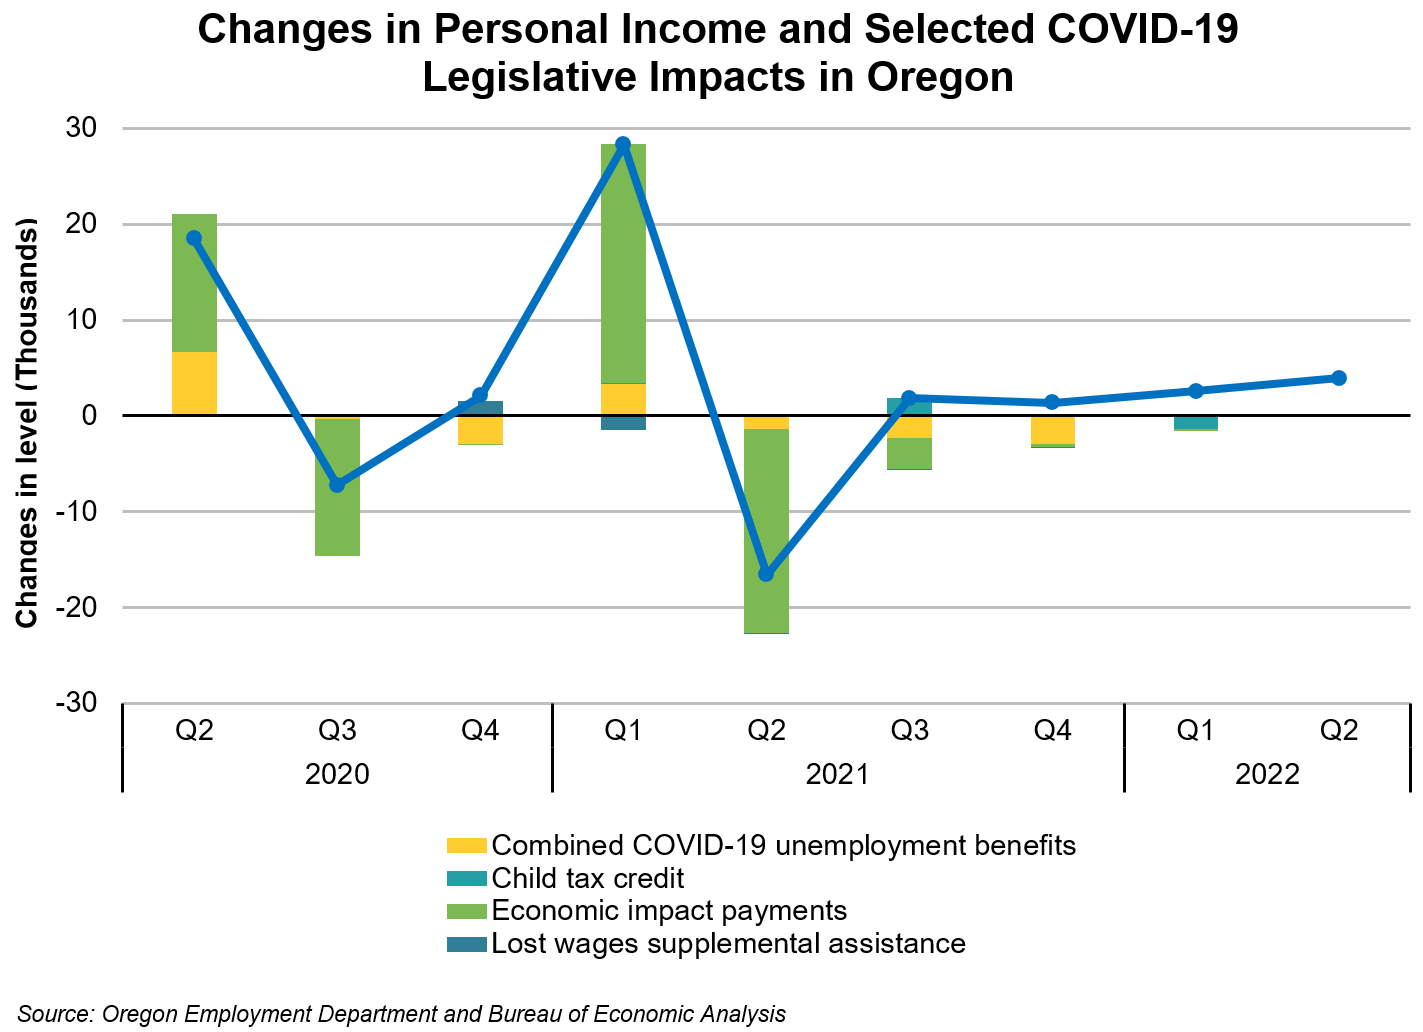 Graph showing changes in personal income and selected COVID-19 legislative impacts in Oregon